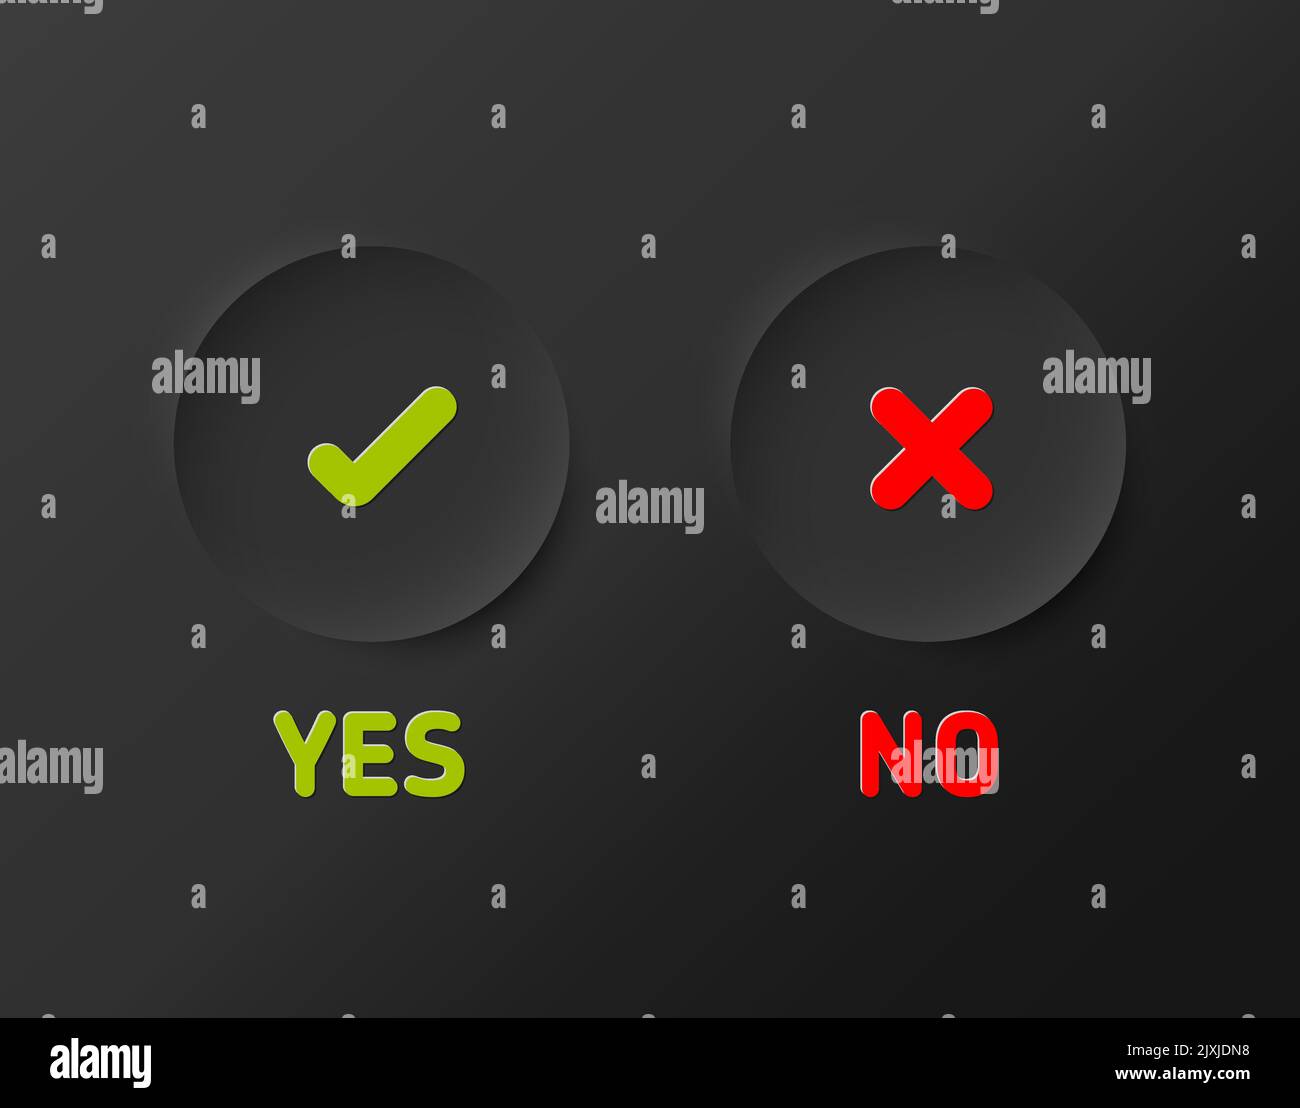 Set of fresh minimalist dark icons for various status - yes, no, accept, cancel in dark gray relief circles on black gradient background - green and r Stock Vector